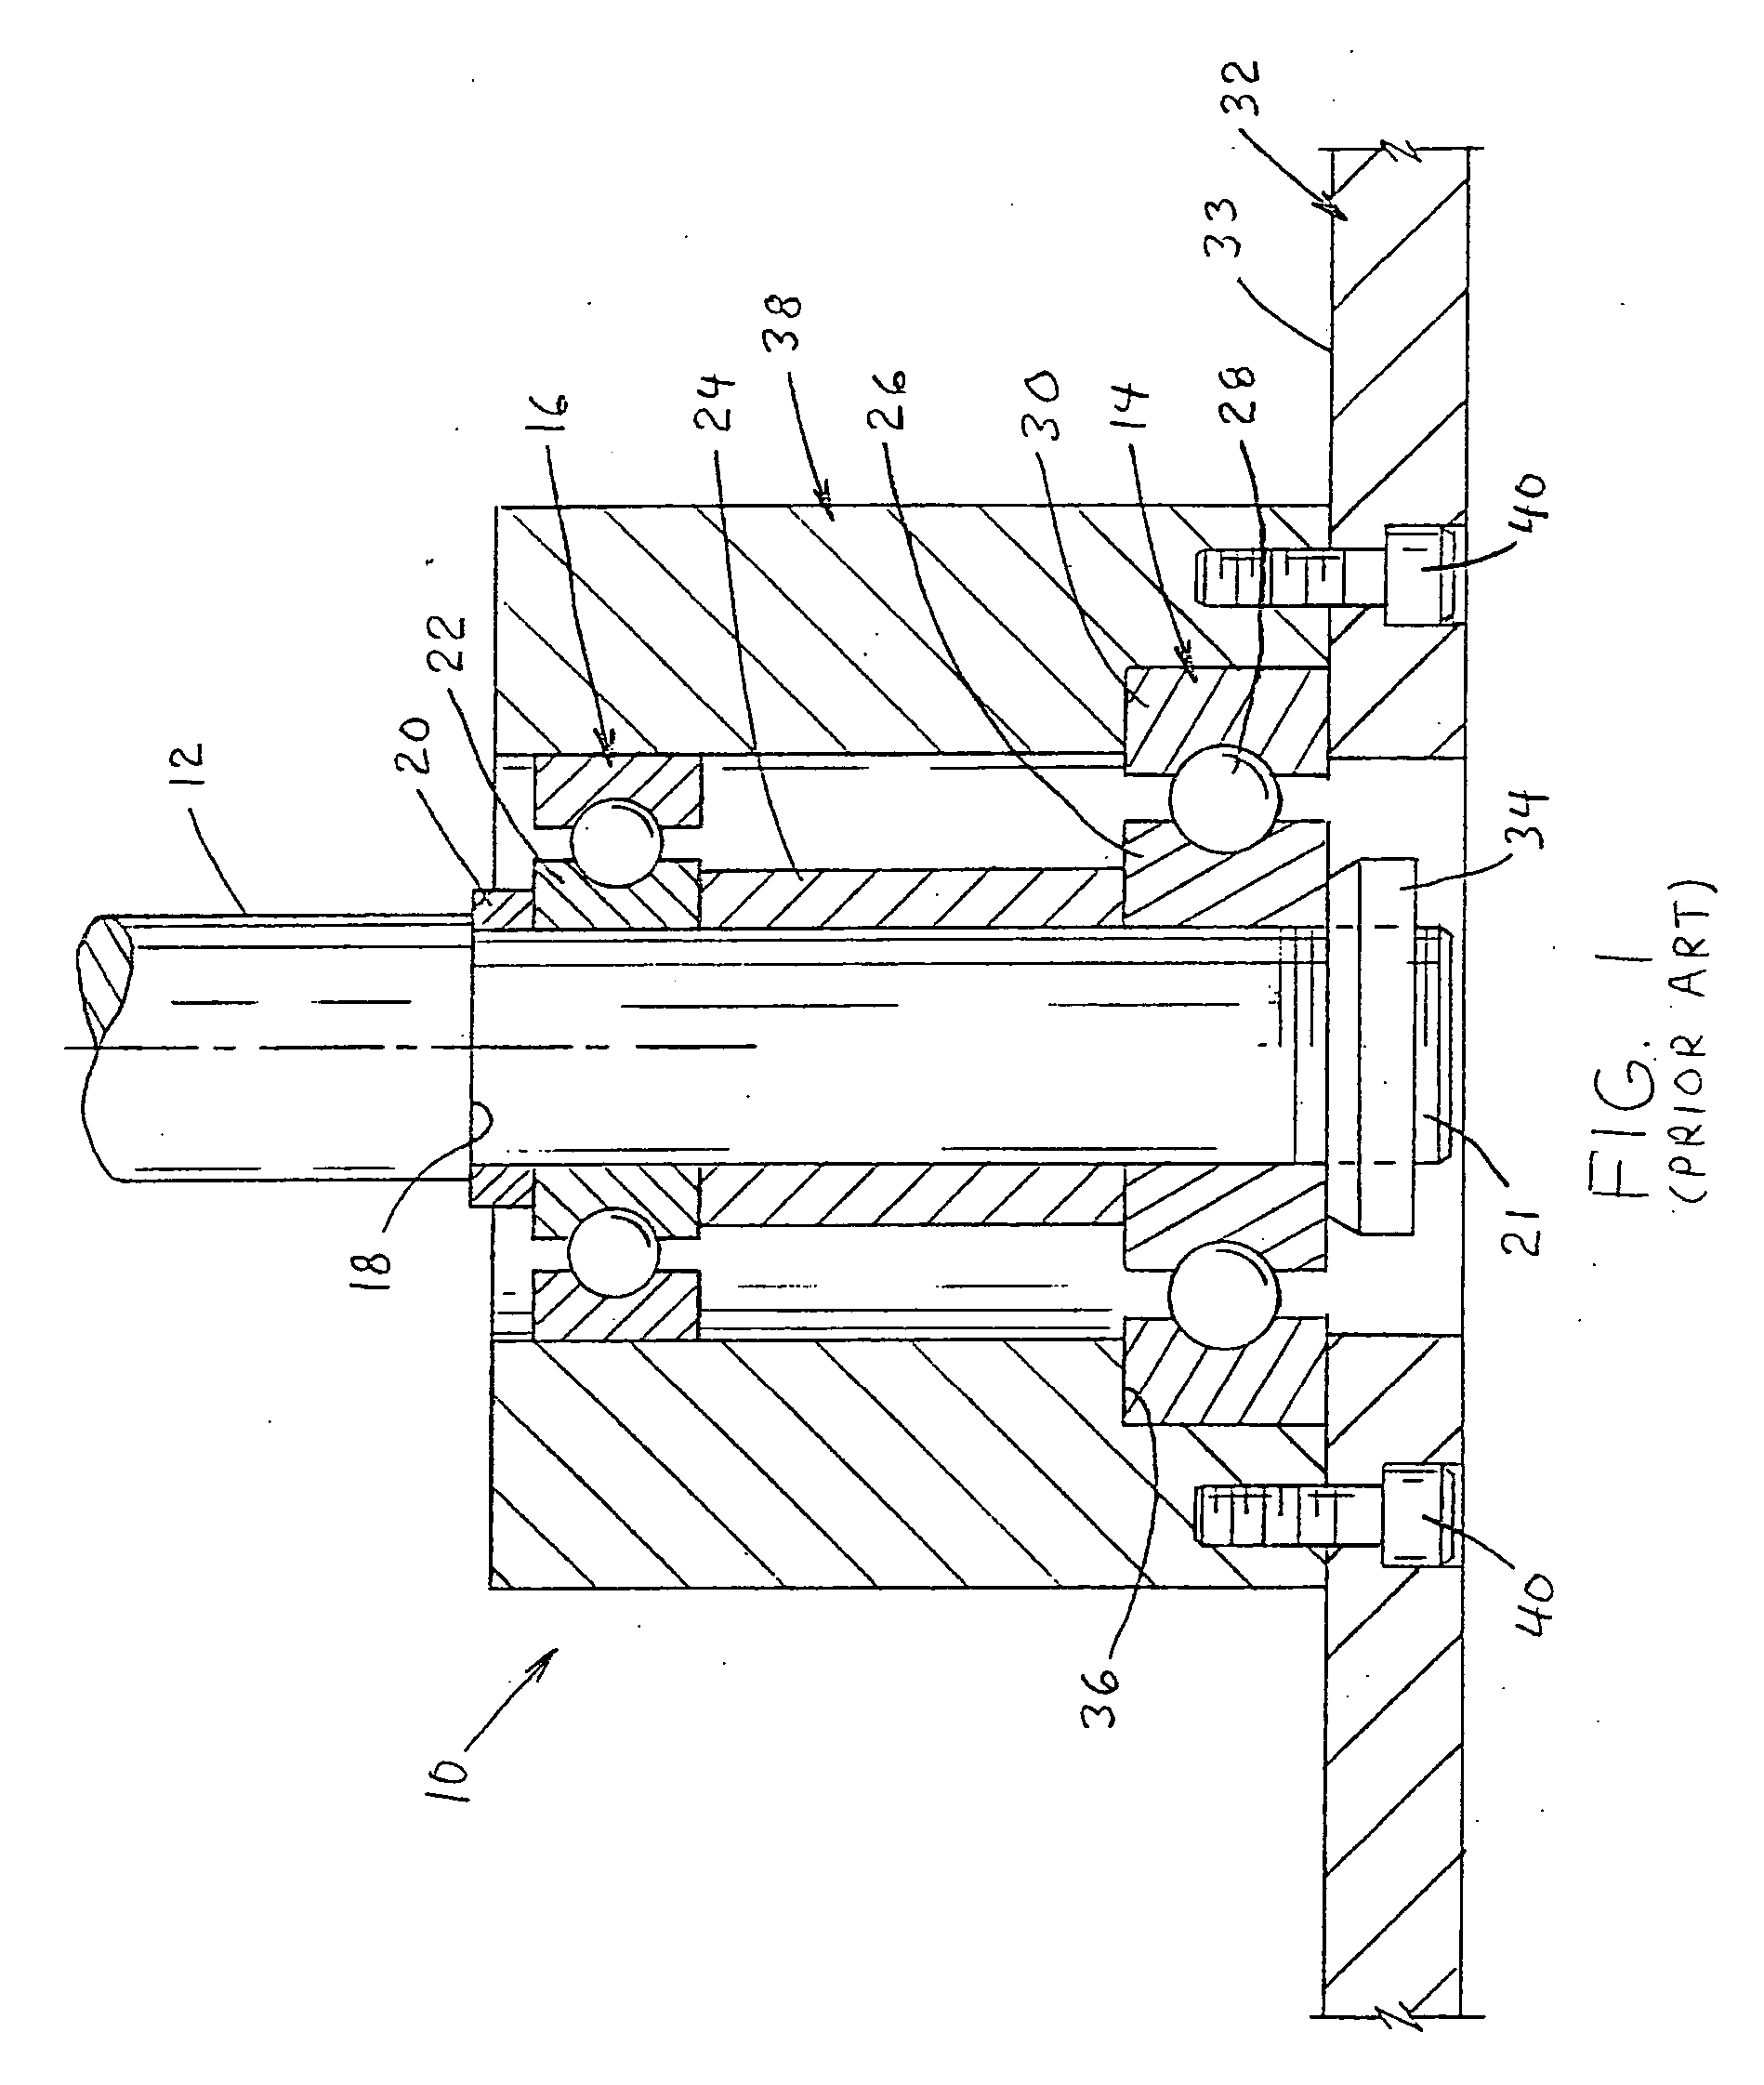 Support bearing assembly